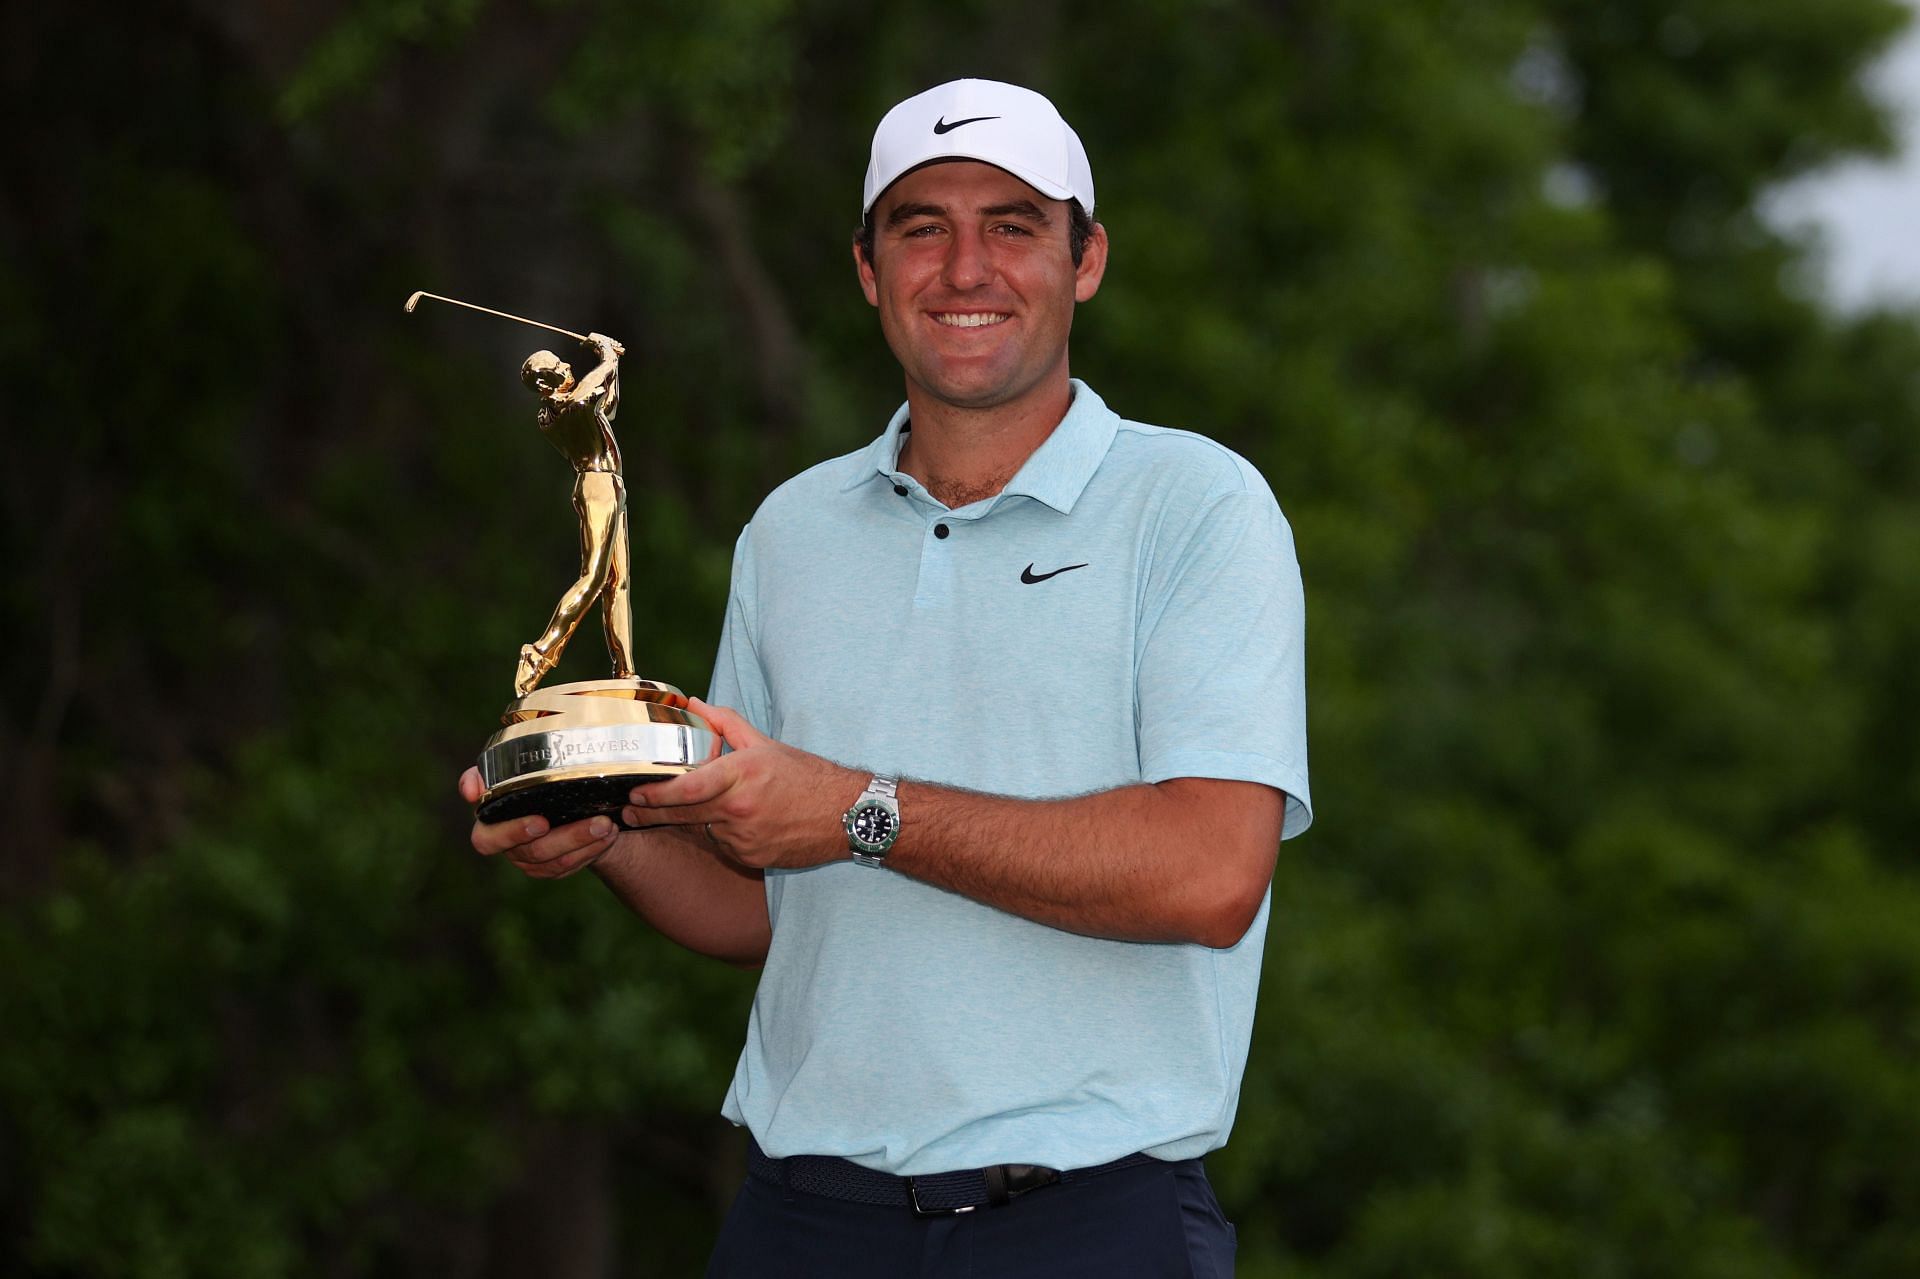 On March 12, 2023, in Ponte Vedra Beach, Florida, Scottie Scheffler of the United States celebrates with the trophy after winning during the final round of THE PLAYERS Championship on THE PLAYERS Stadium Course at TPC Sawgrass.